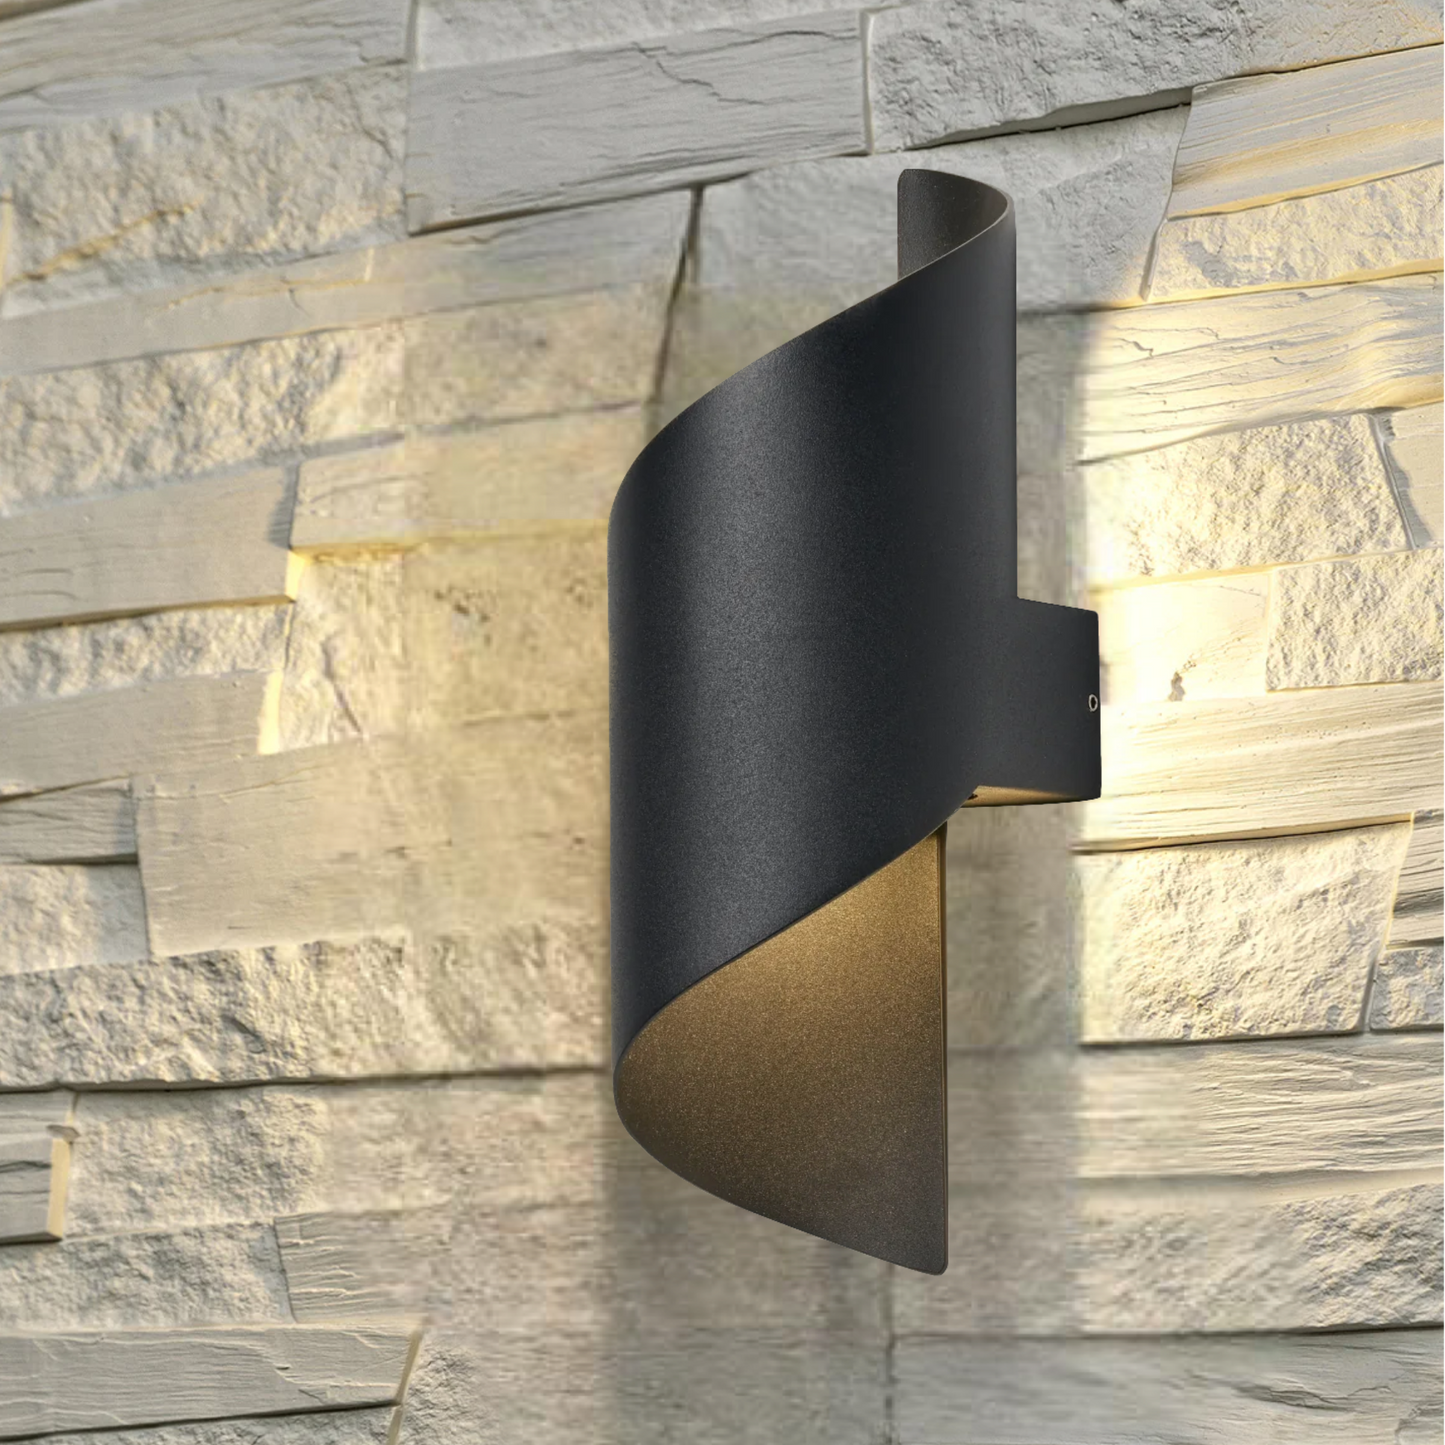 CGC FELIX Black Curved LED 4000k Outdoor Wall Light IP54 Aluminium 460lm Natural White